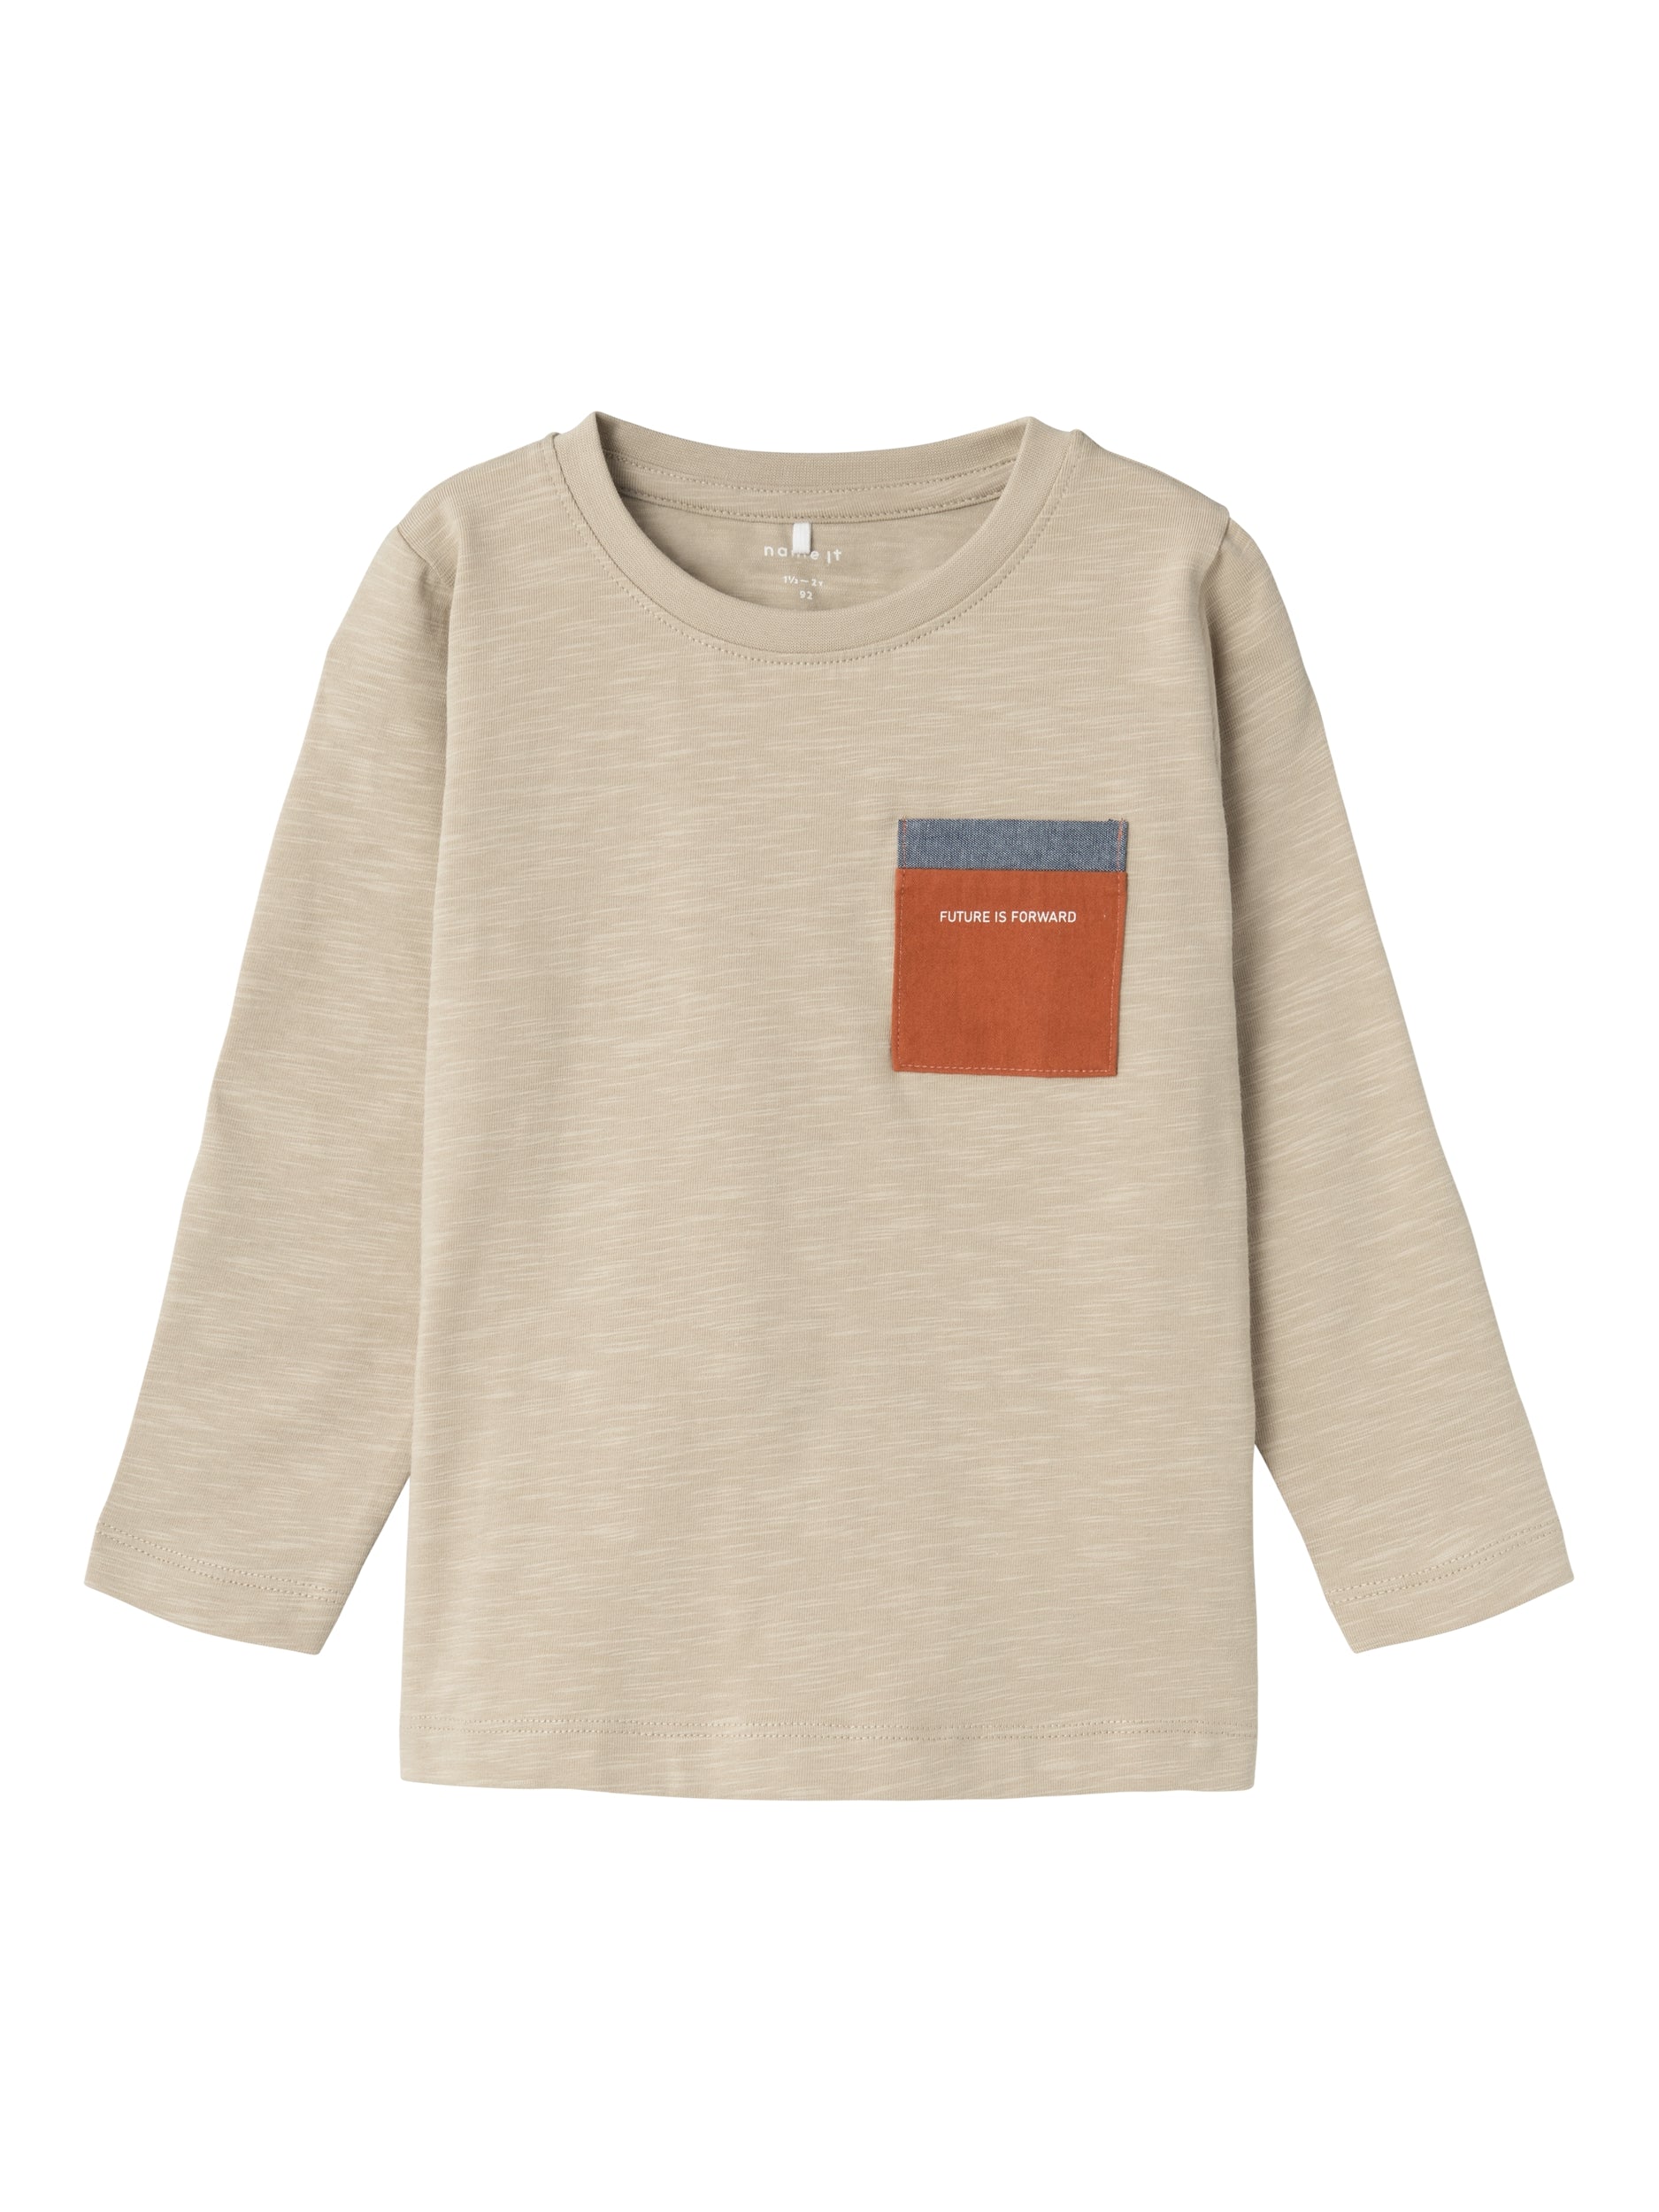 Boy's Benny Long Sleeve Top-Pure Cashmere-Front View